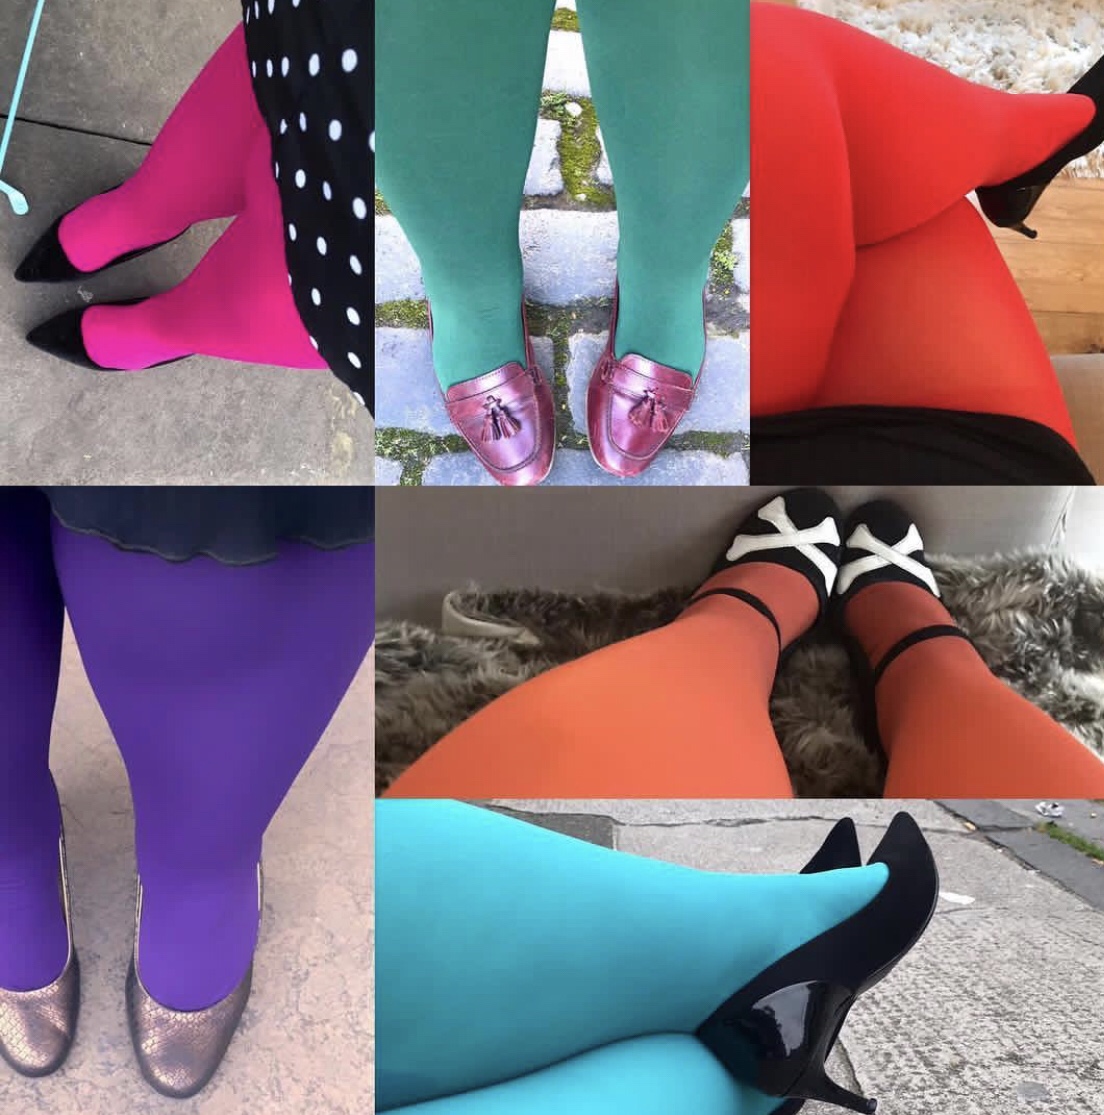 Snag Tights - We created Snag Tights to give you tights that fit. We  created Chub Rub Shorts to fix chub rub. WHAT CAN WE FIX FOR YOU NEXT?  🛠🛠🛠 Think of